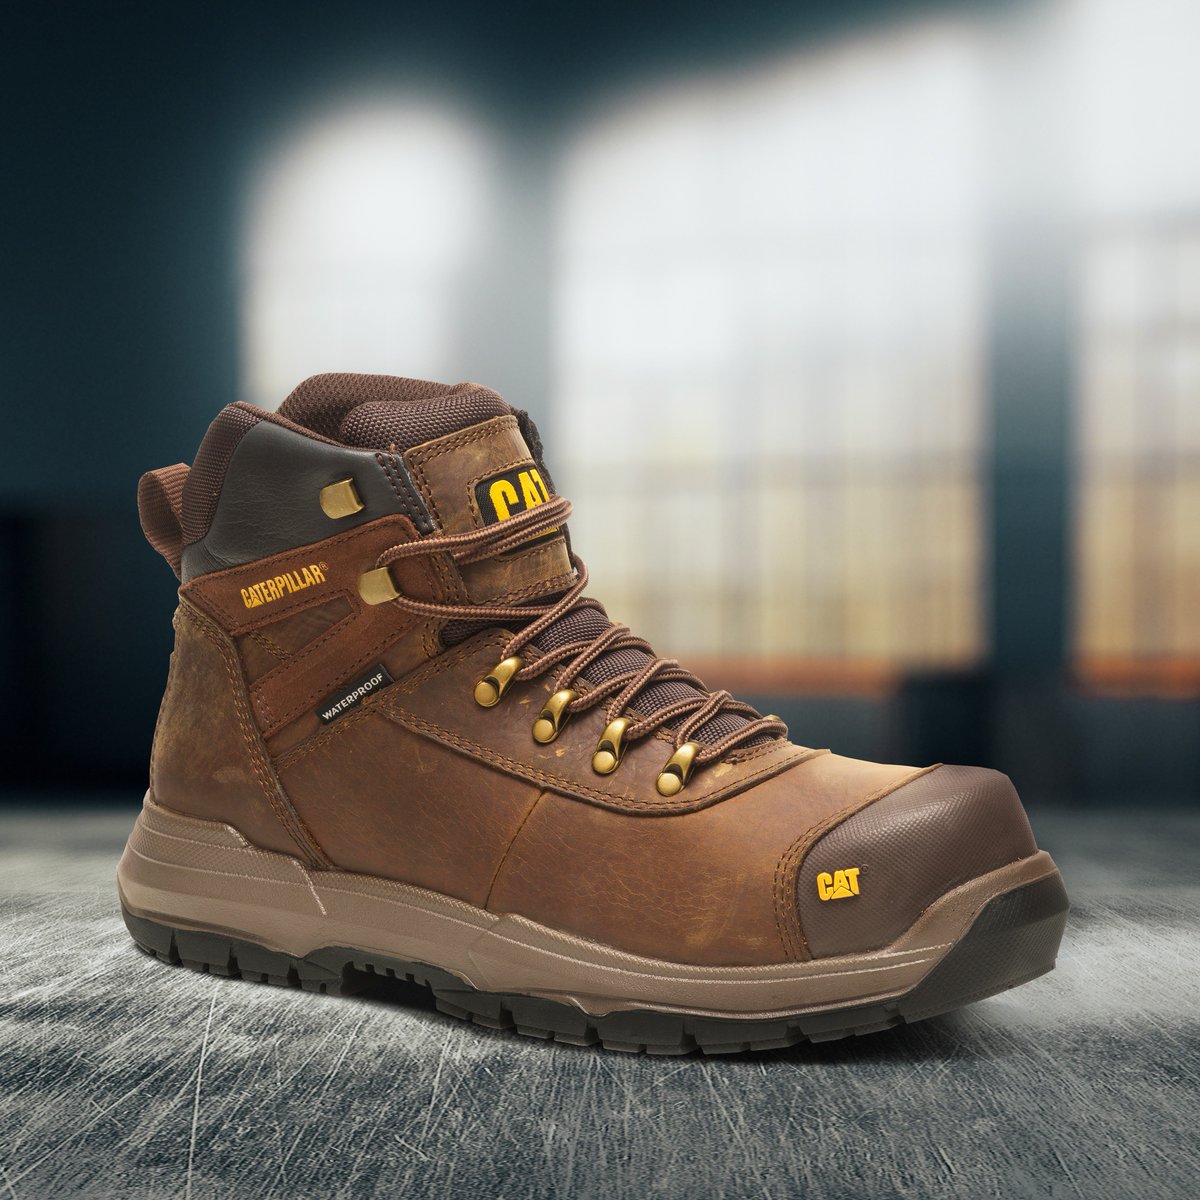 Meet the Pneumatic 2.0 ST S3 – where rugged meets refined. With steel toe protection and waterproof features, these boots offer unbeatable safety without compromising style.

R3,499.99
#catfootwearsa